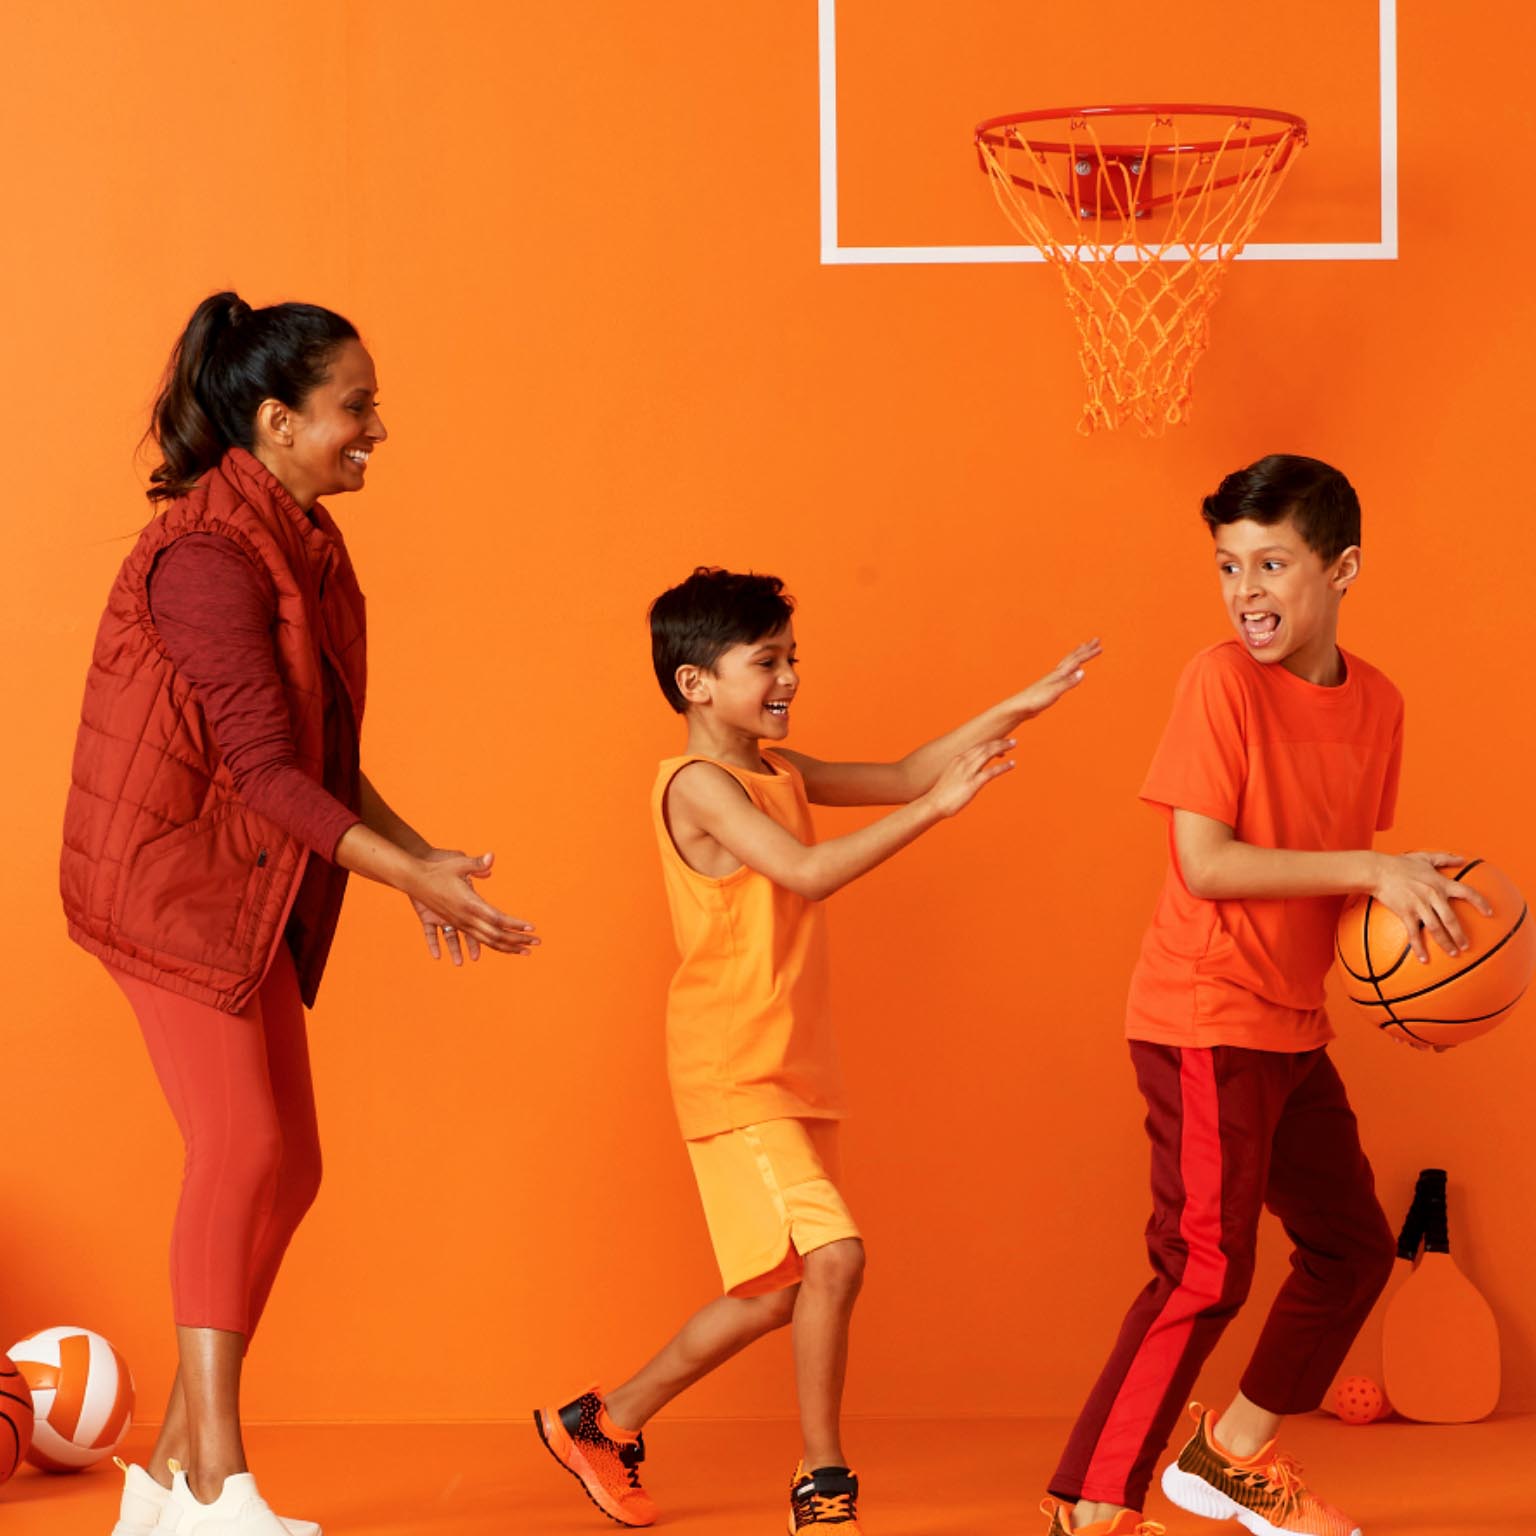  a family playing basketball together